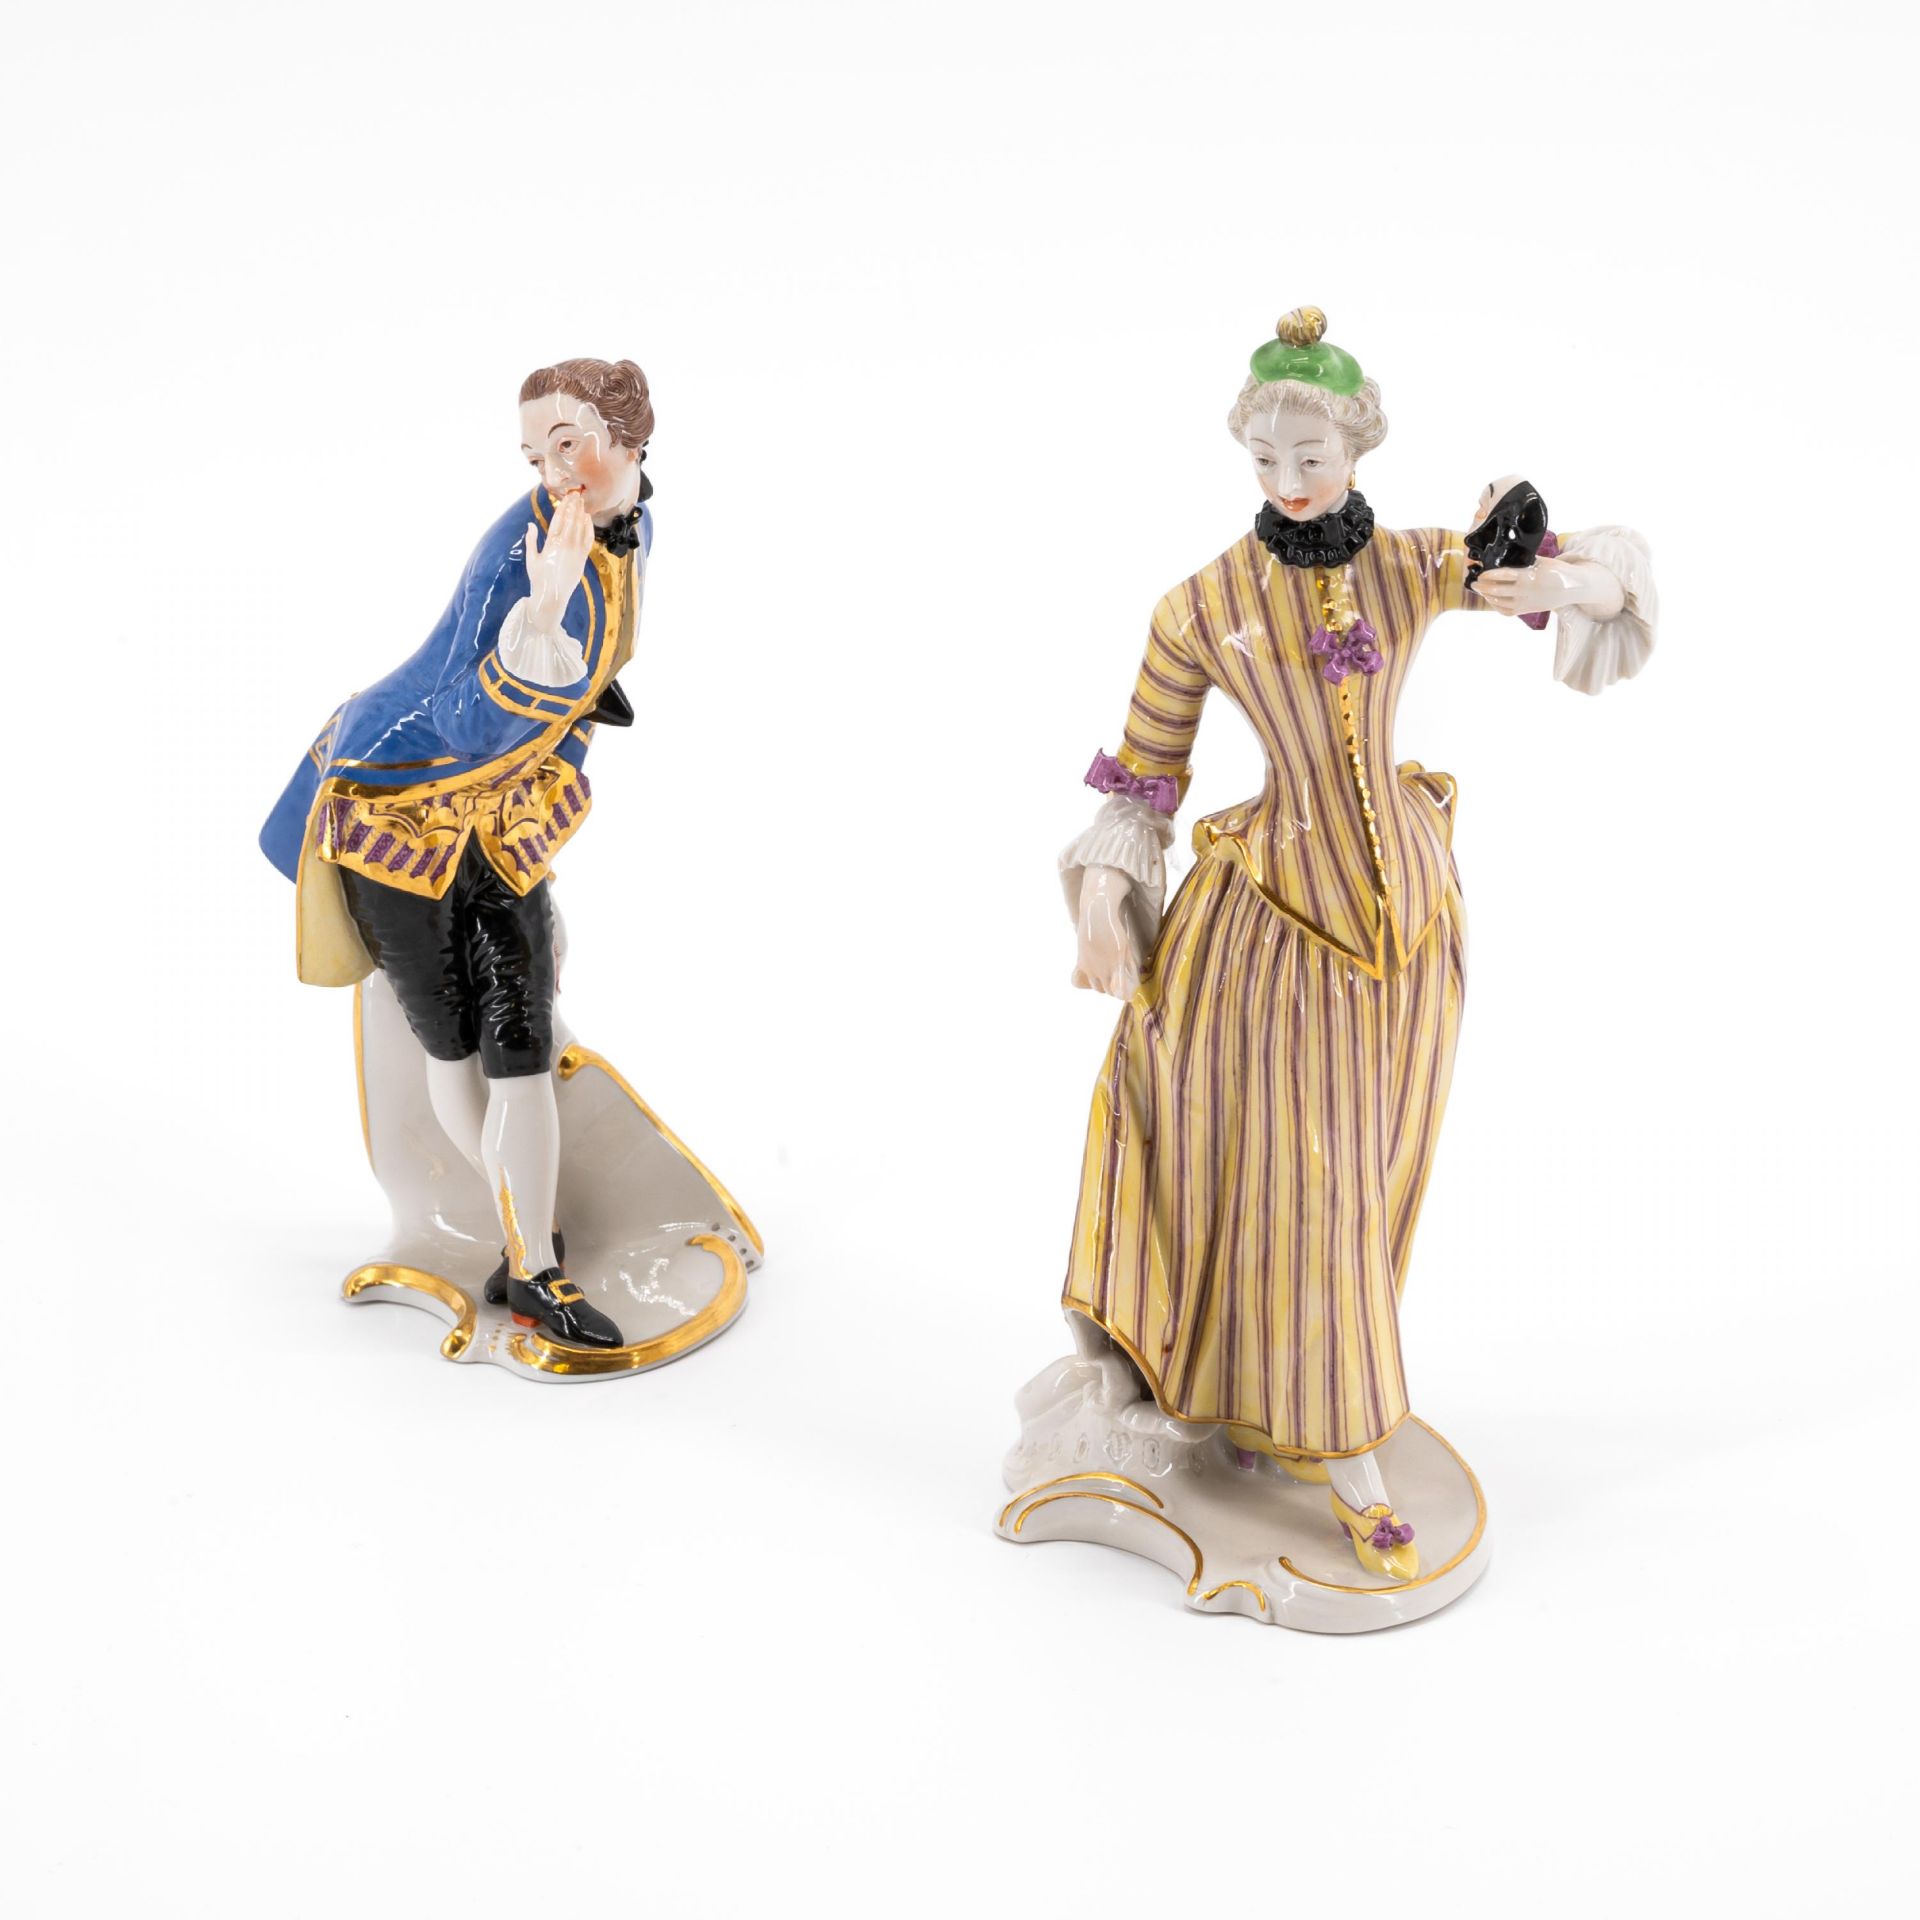 Nymphenburg: COLUMBINE AND OCTAVIO FROM THE 'COMMEDIA DELL'ARTE'